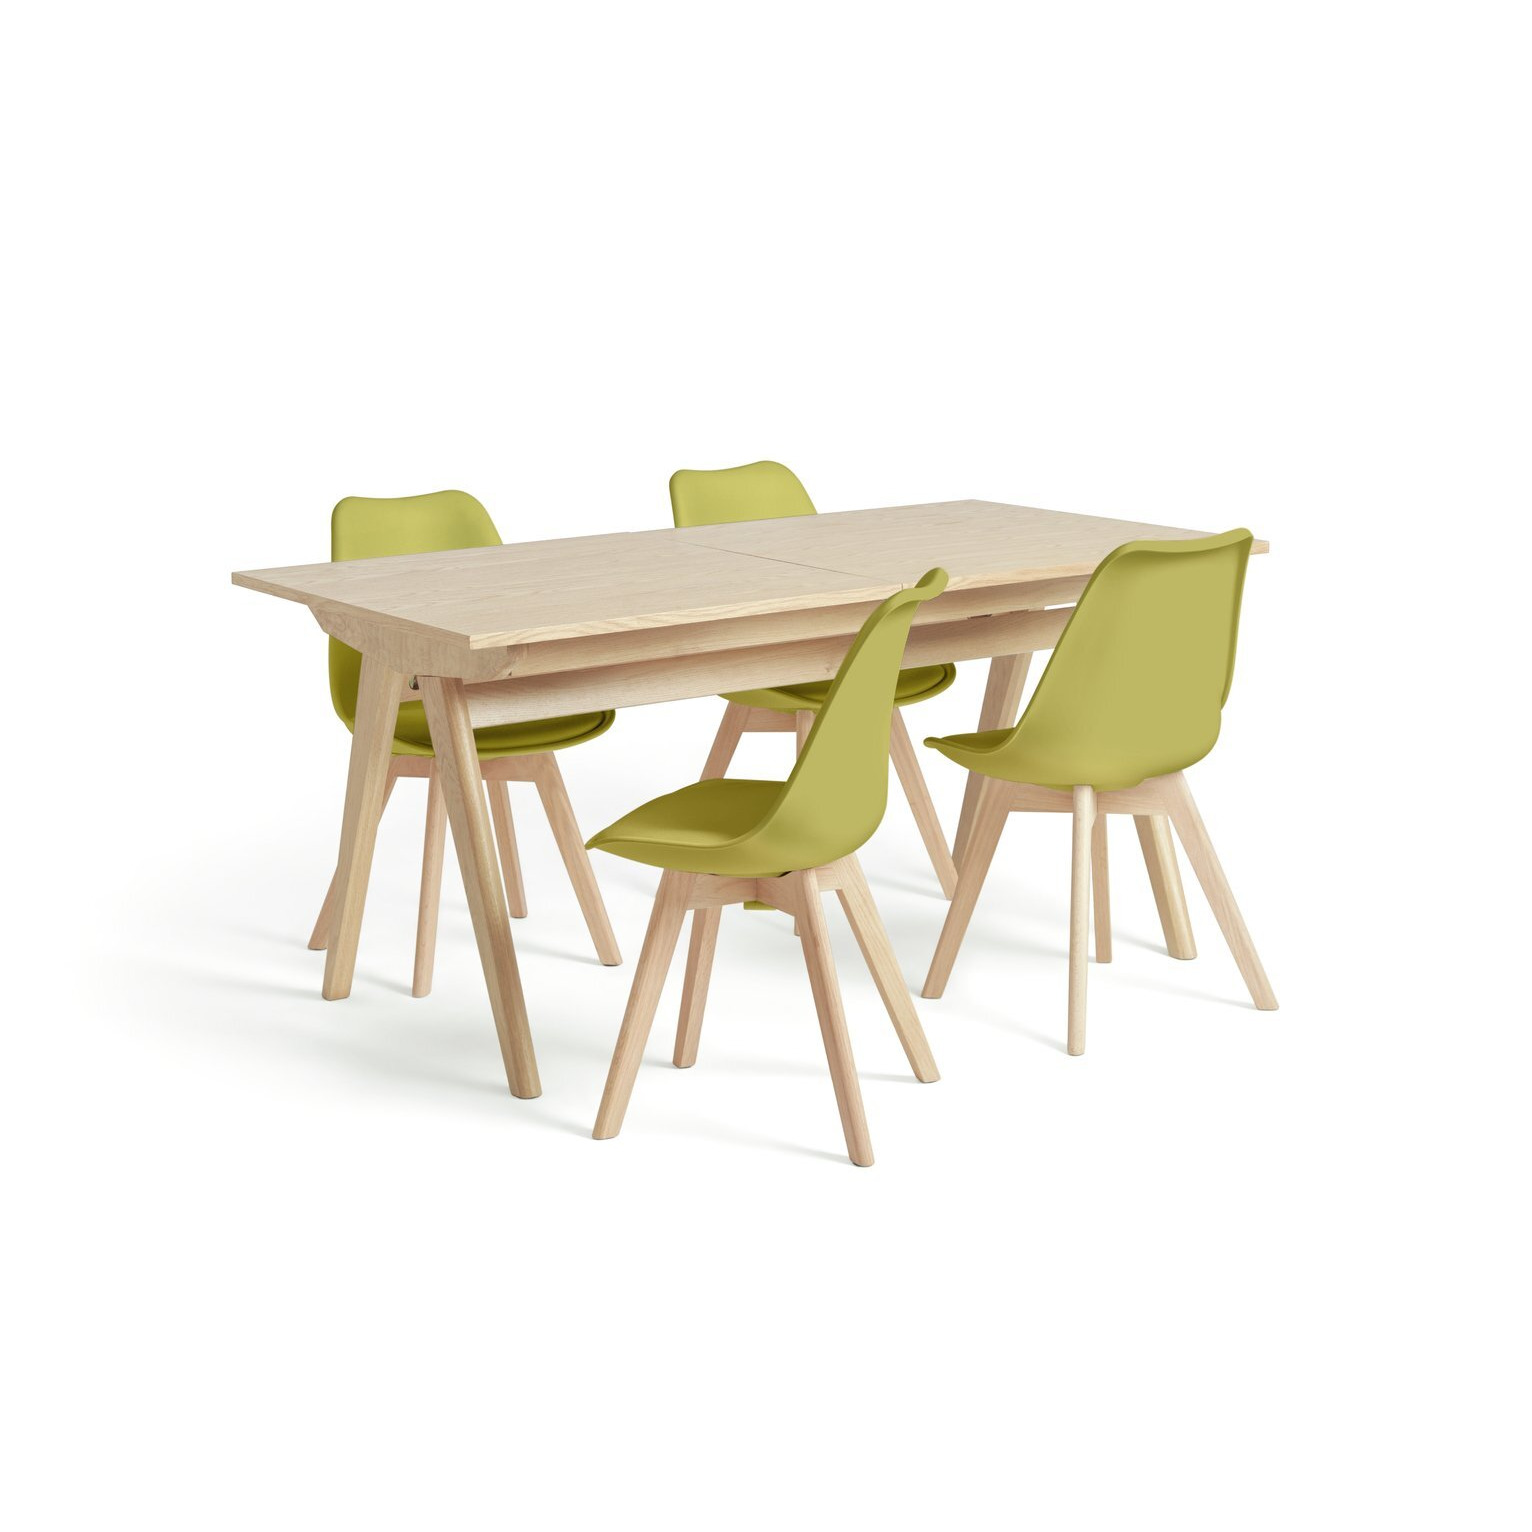 Habitat Jerry Extending Dining Table & 4 Mustard Chairs - image 1